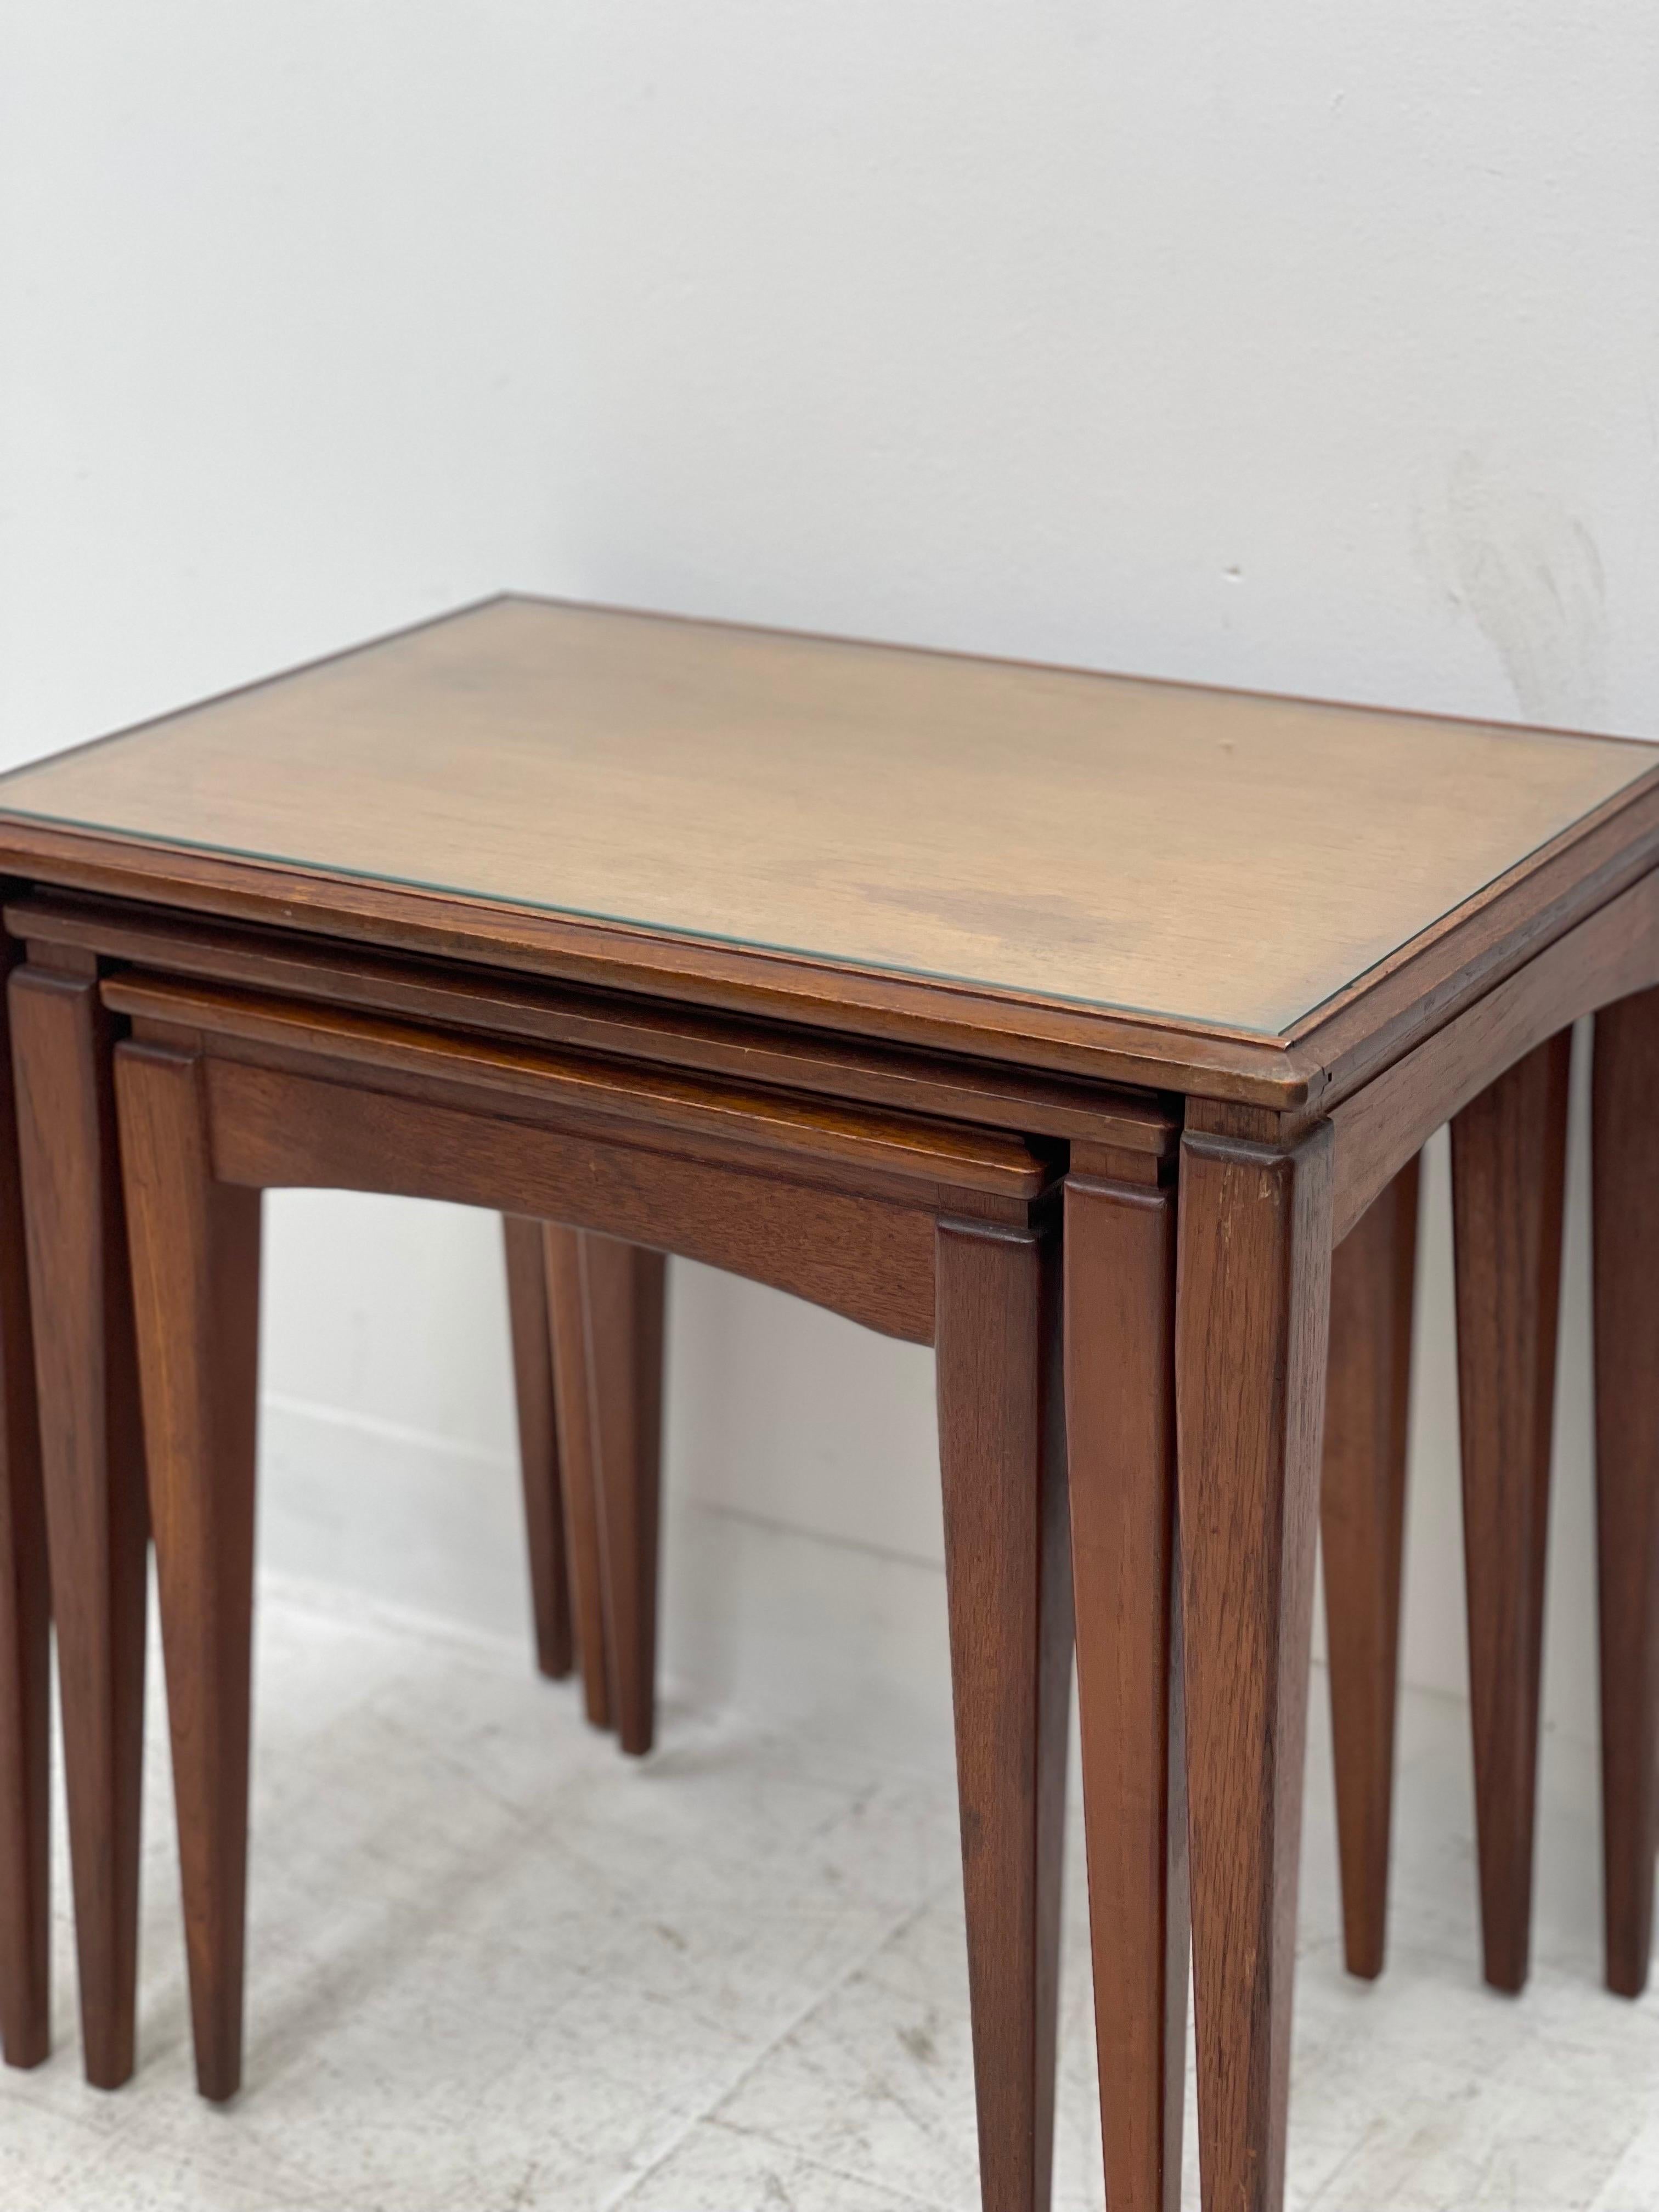 Vintage Mid-Century Modern Nesting Tables In Good Condition For Sale In Seattle, WA